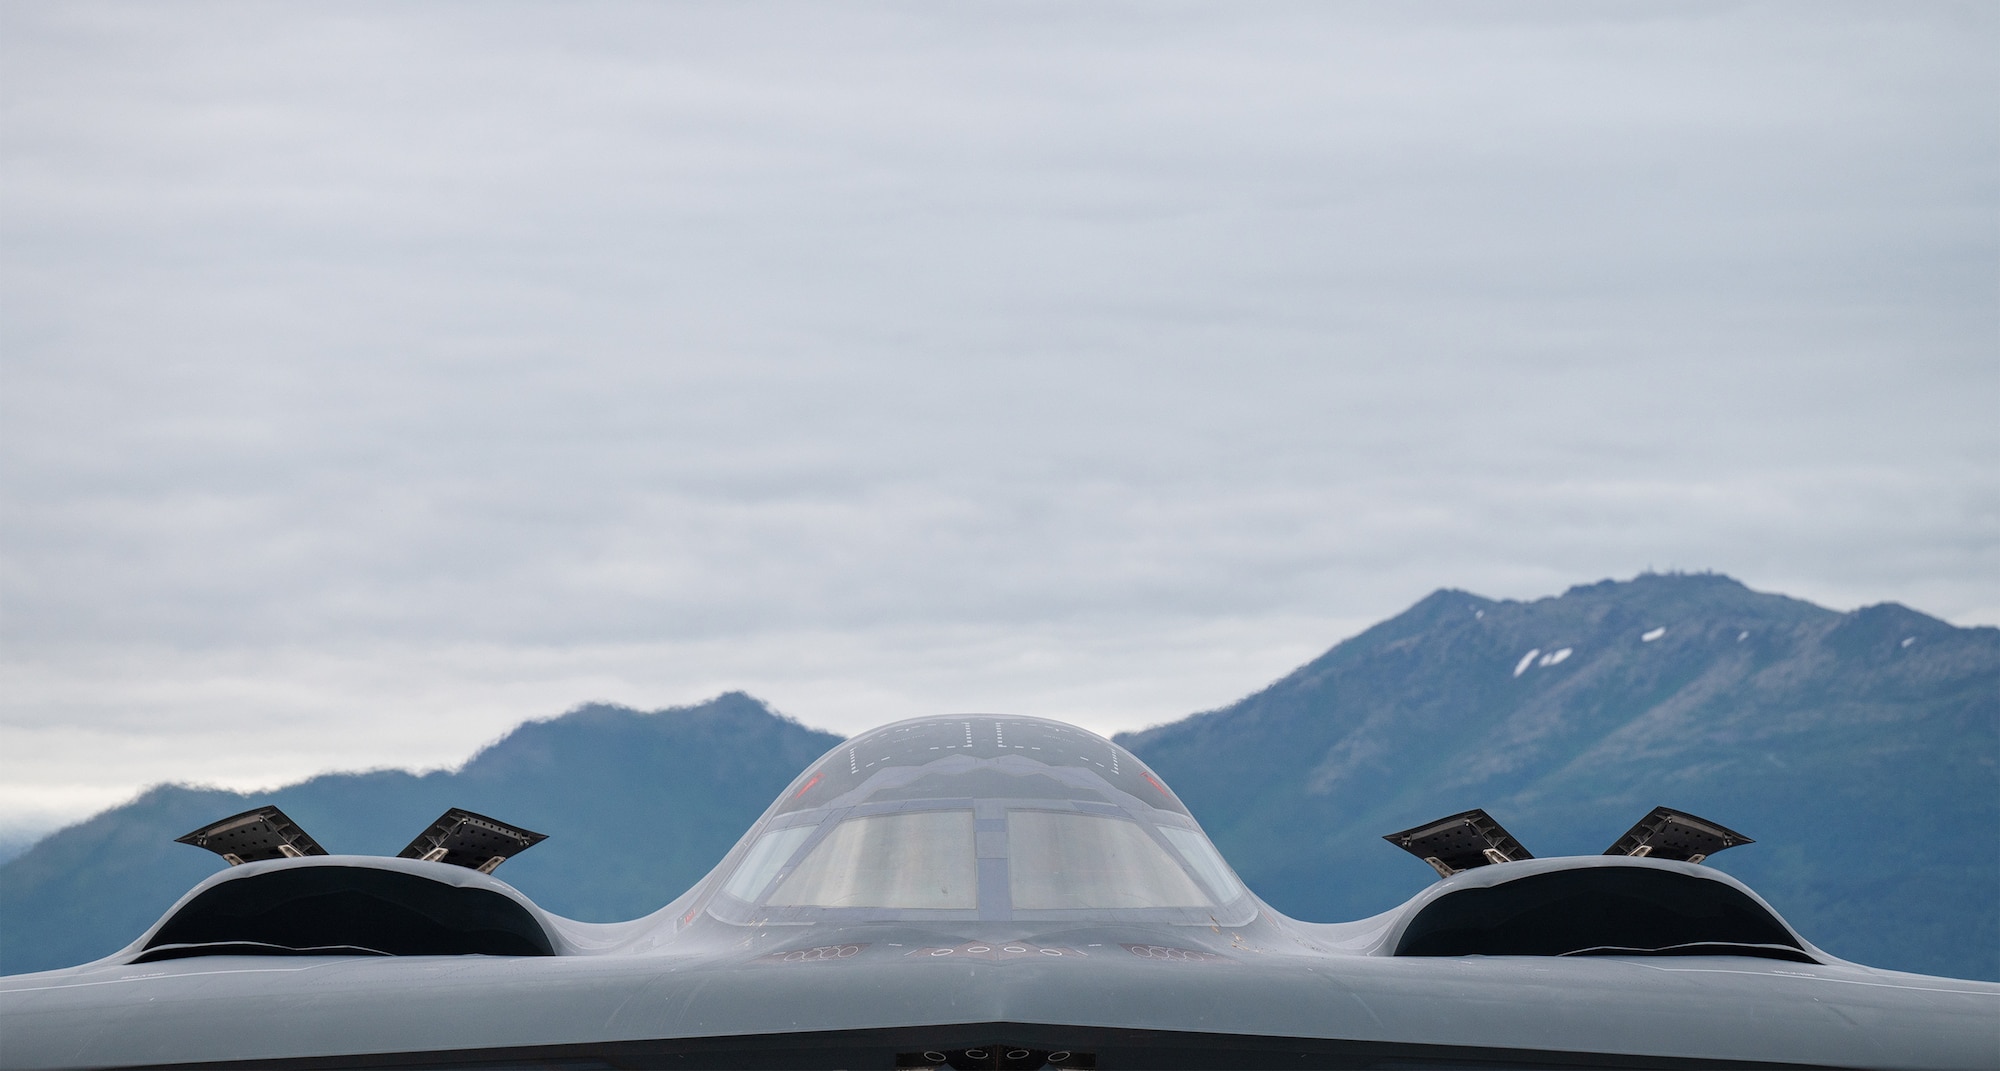 Delivering assurance: tri-bombers sync efforts in Alaska frontier